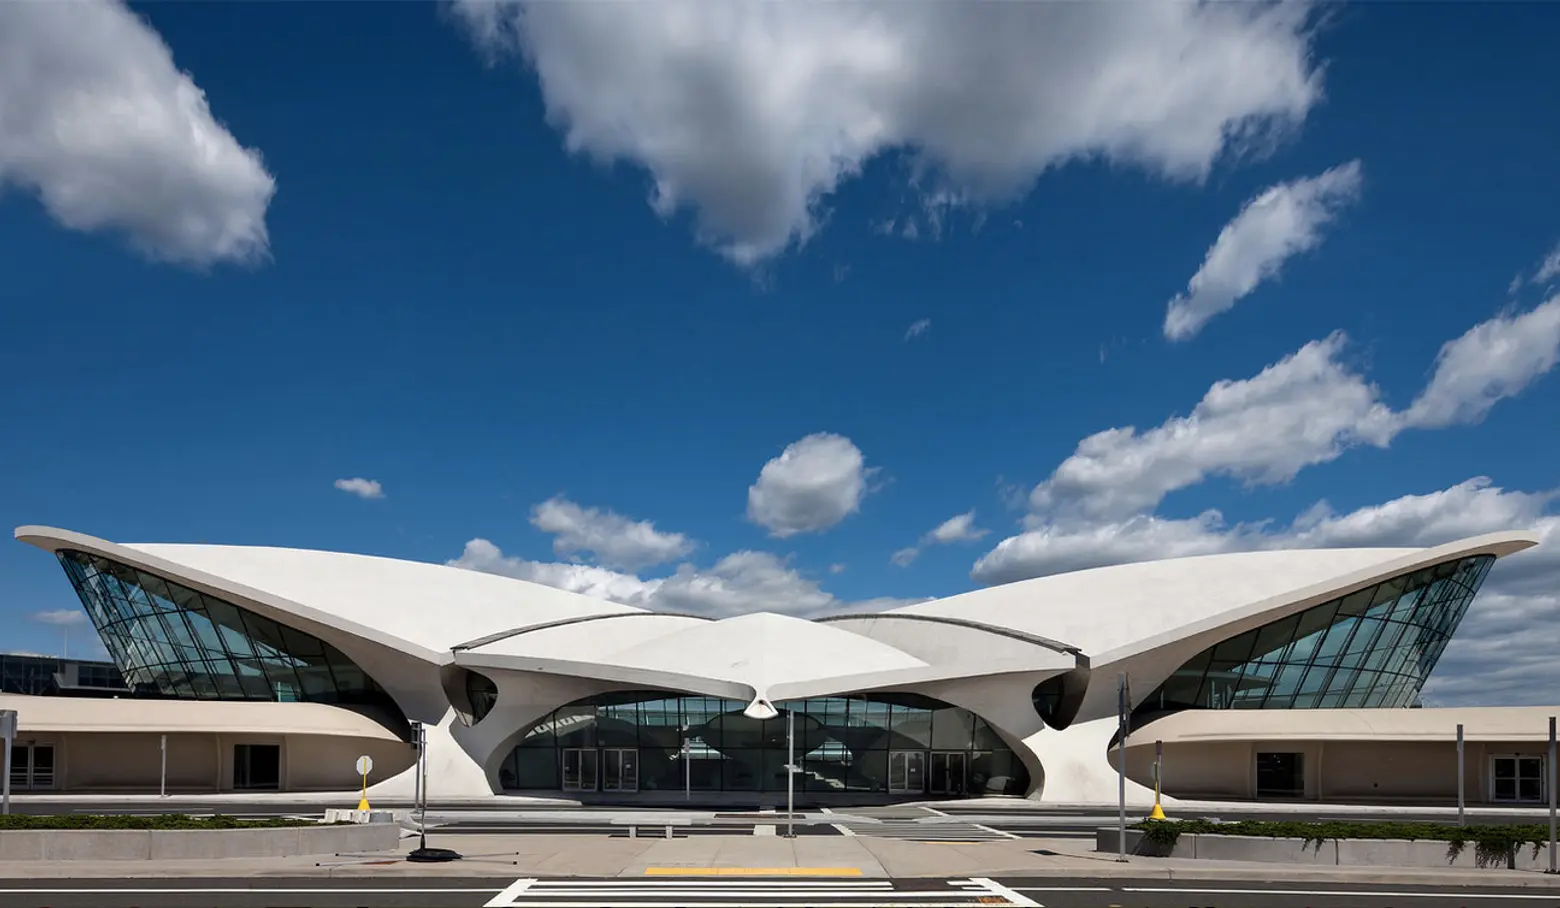 It’s Official! JetBlue Will Turn the Iconic TWA Flight Terminal at JFK Into a Hotel